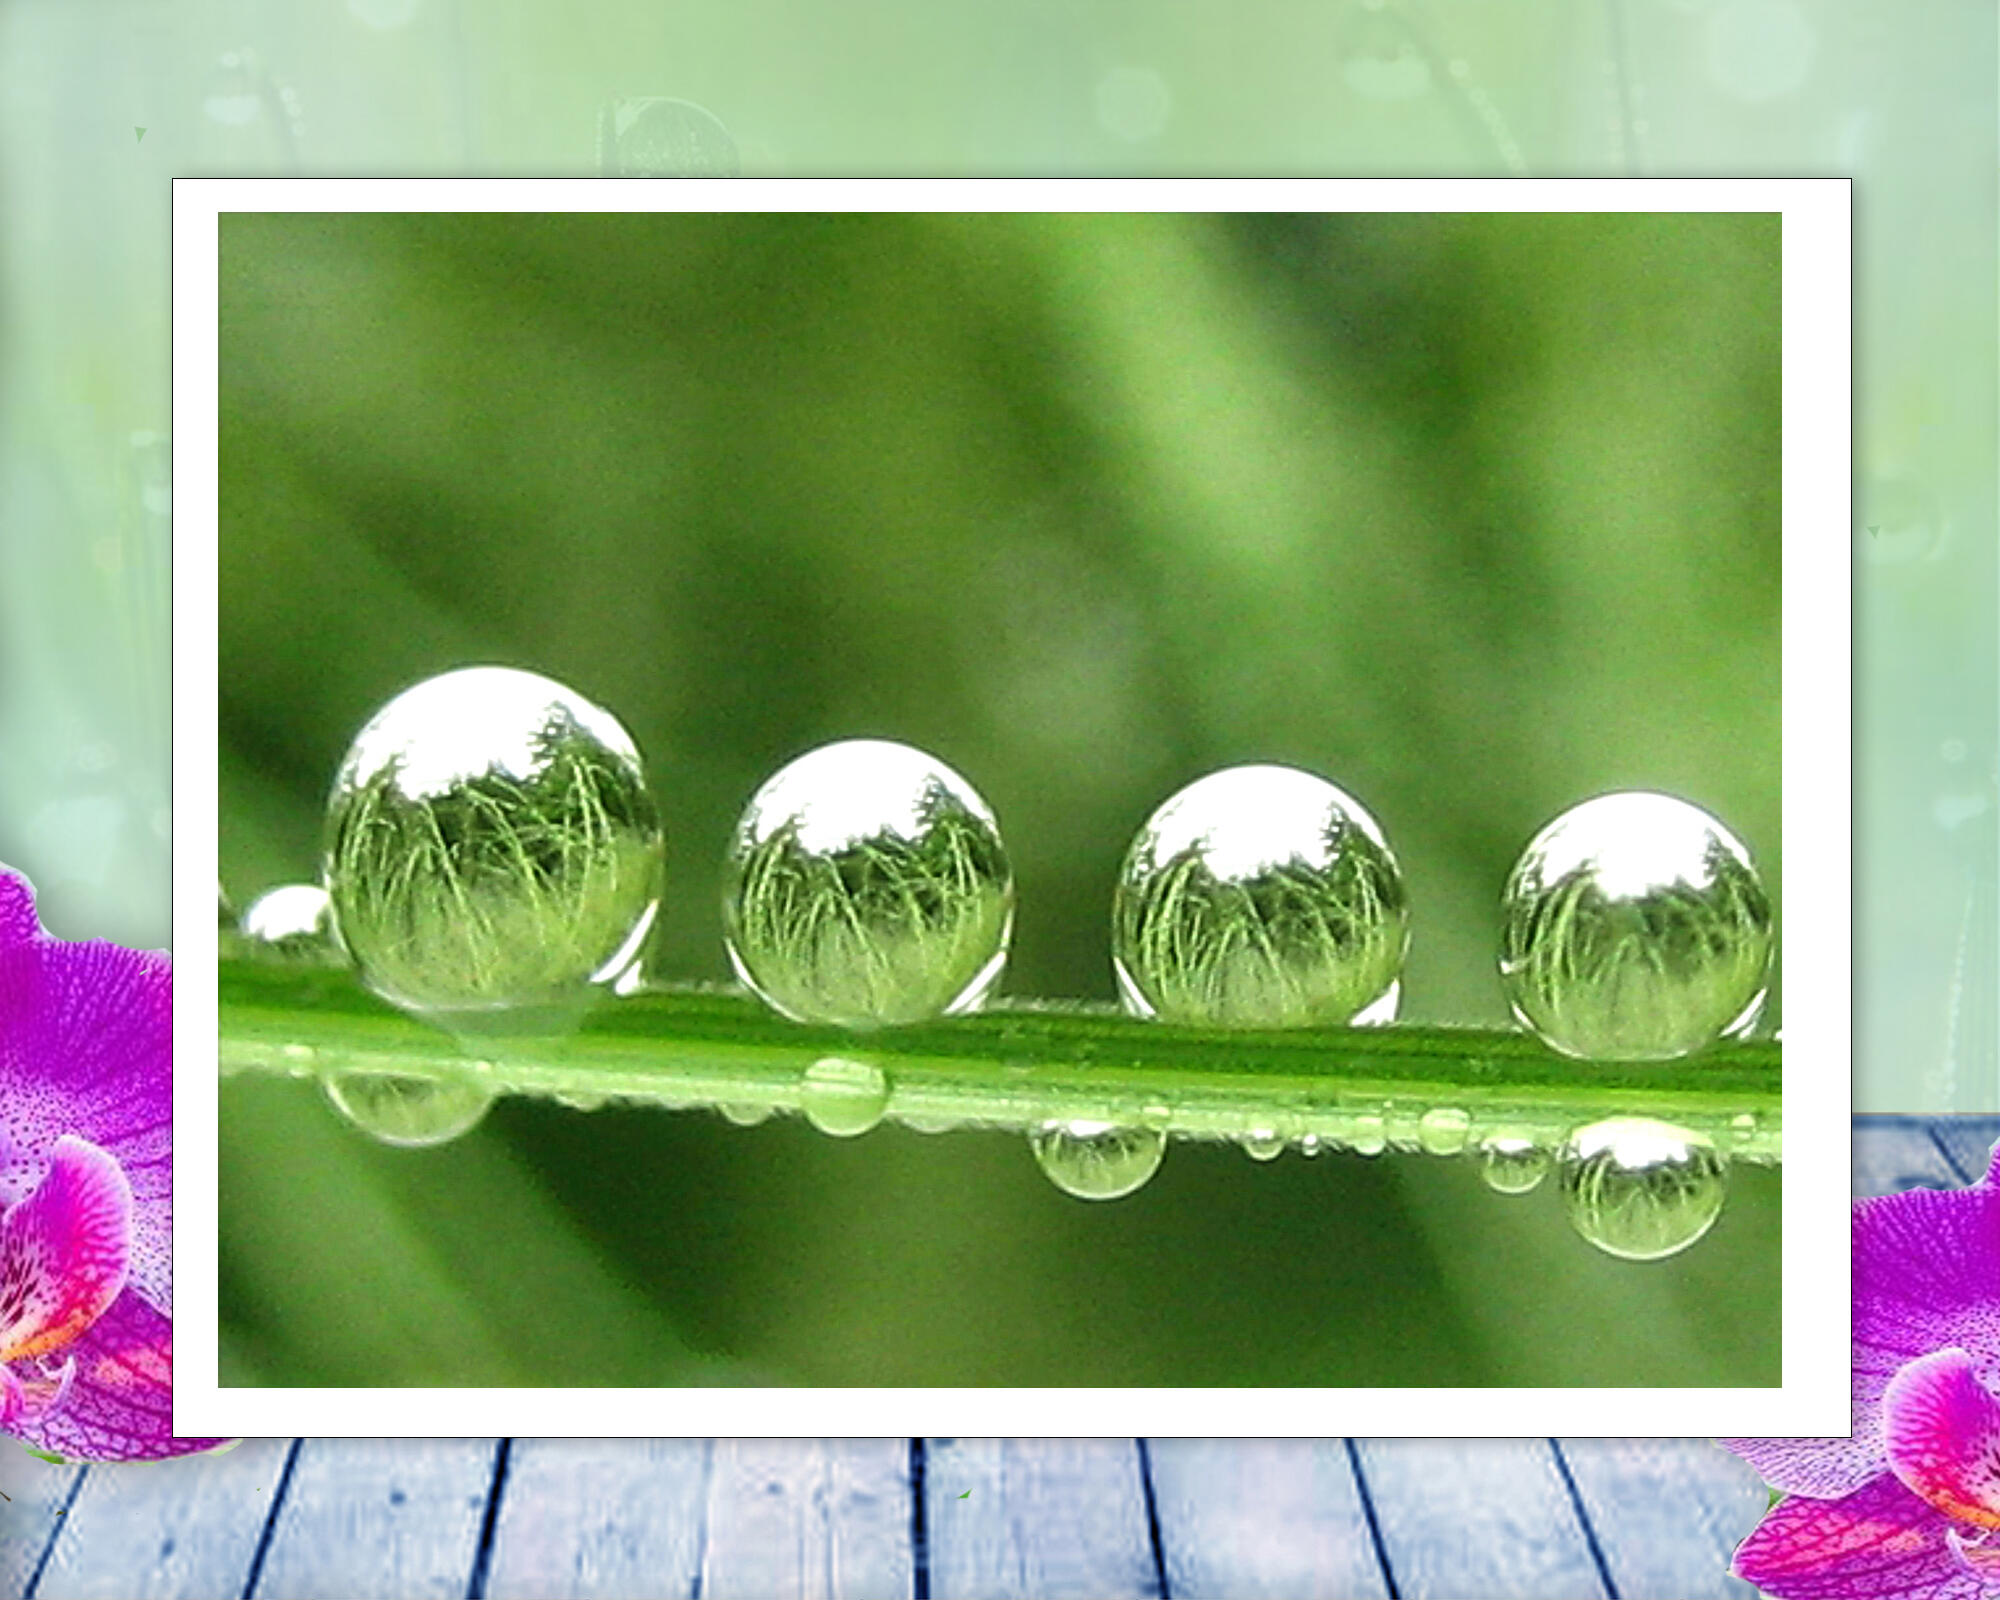 Four drops of water rest on a blade of grass reflecting the world around them, in this beautiful, peaceful, nature photo with poem-Water Parks by The Poetry of Nature